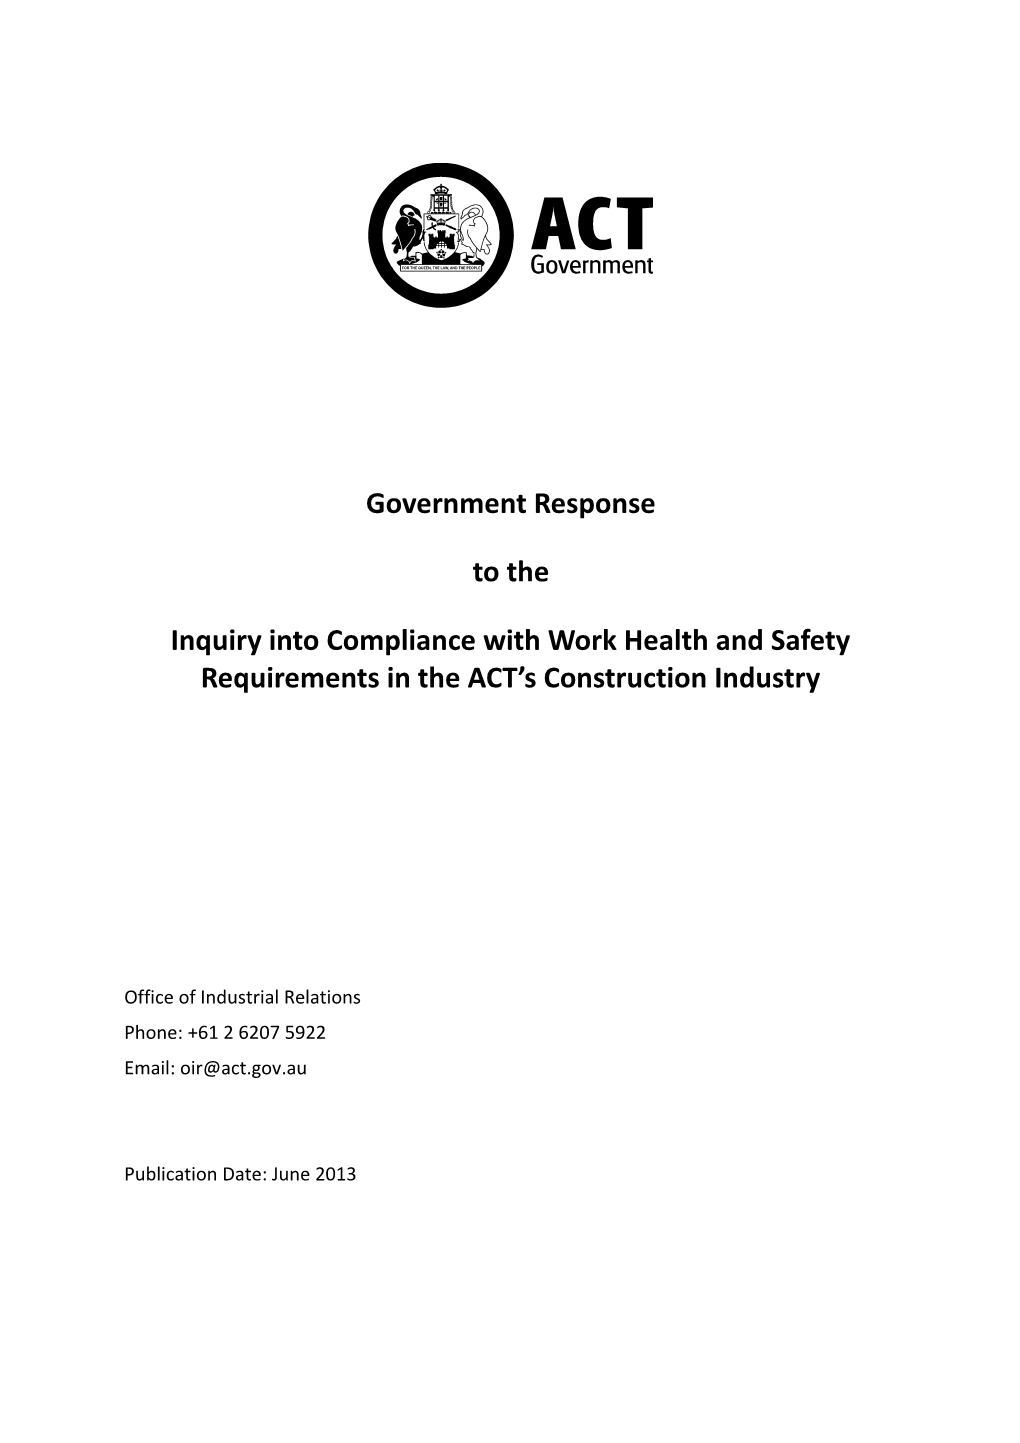 Government Response to the Inquiry Into Compliance with Work Health and Safety Requirements